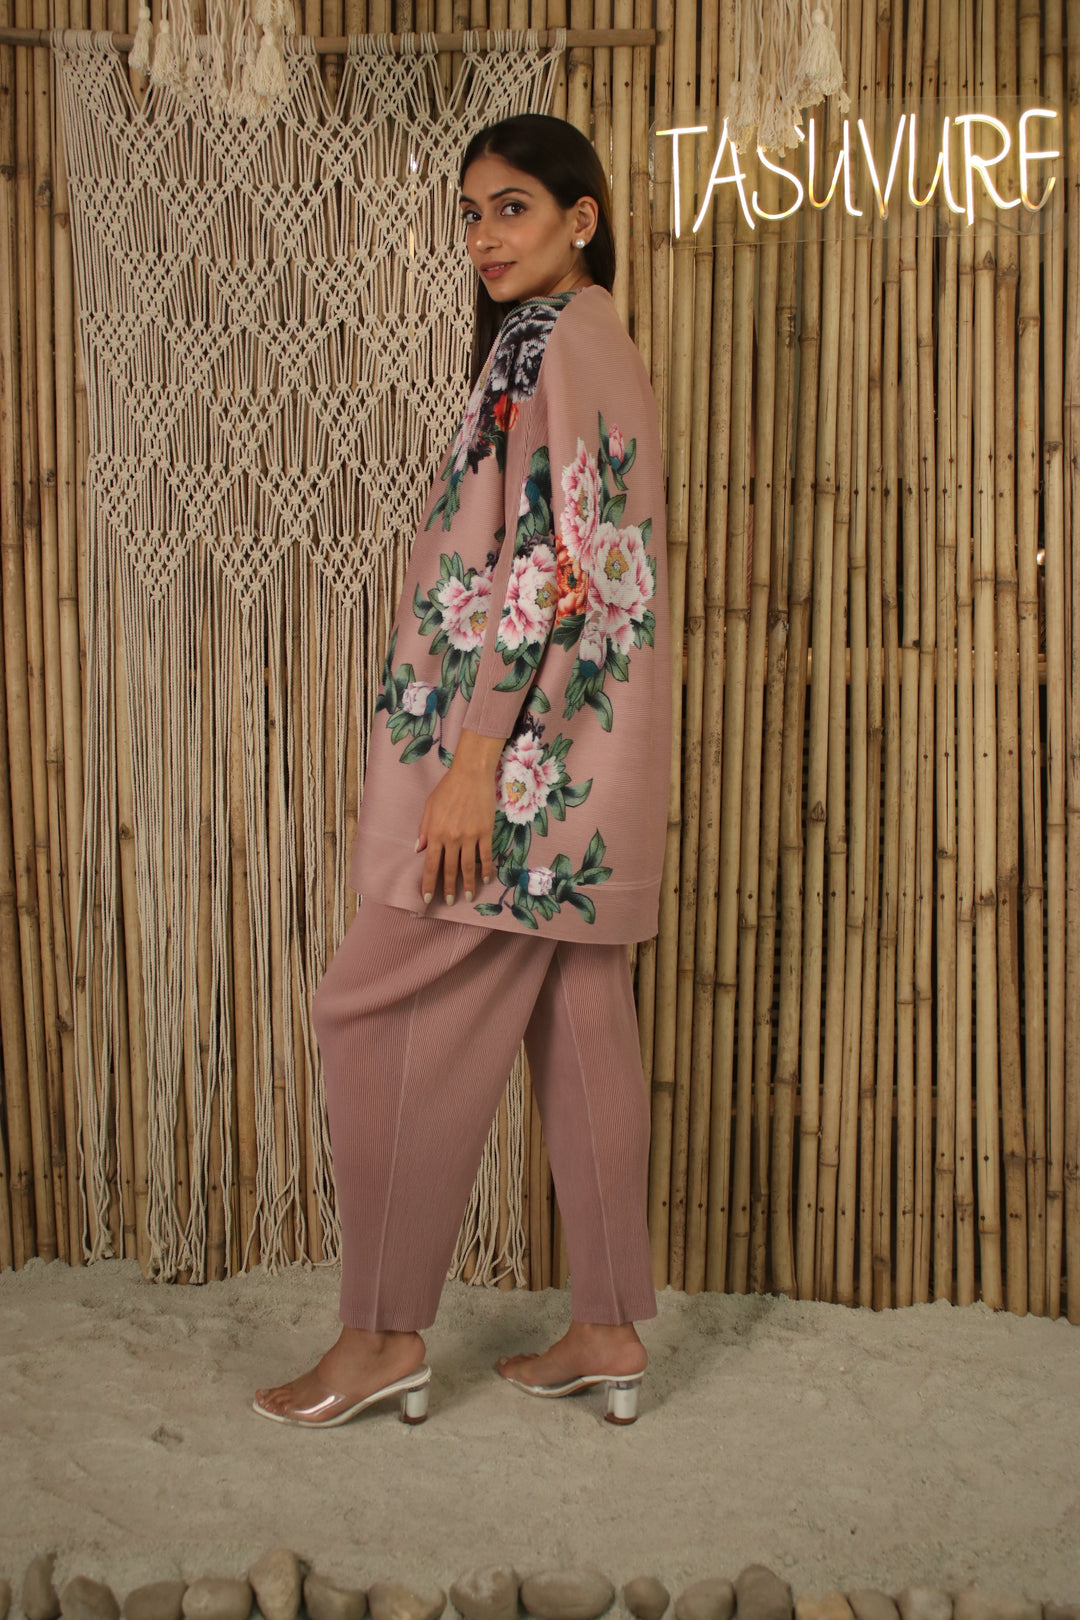 The floral shirt comes with center front button closure, dolman sleeves and an ankle length pleated pants., Shop Party wear outfit from Tasuvure Online Fashion Designer store